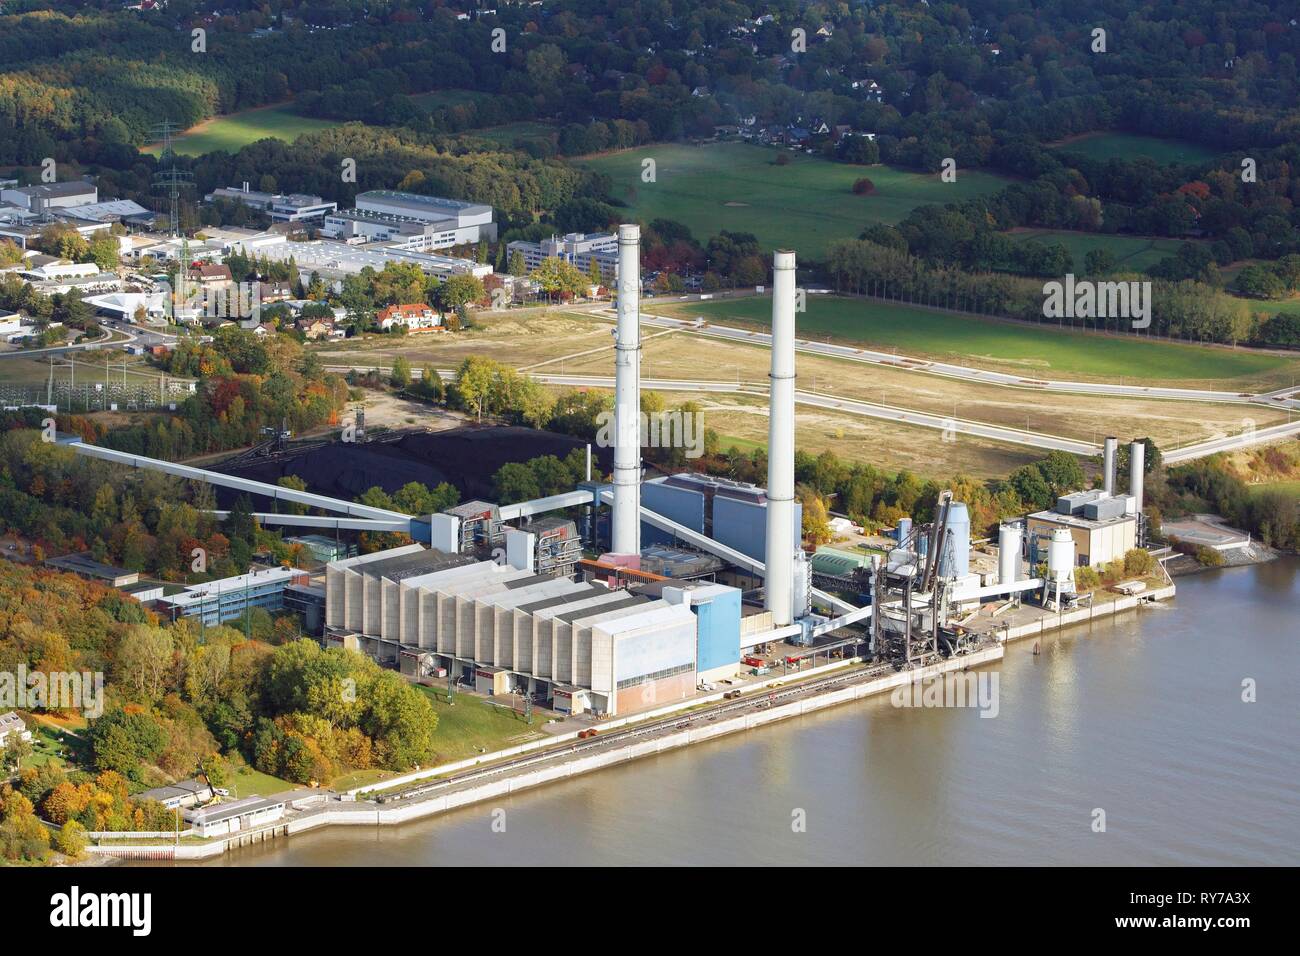 Wedel combined heat and power plant, Schleswig-Holstein, Germany Stock Photo